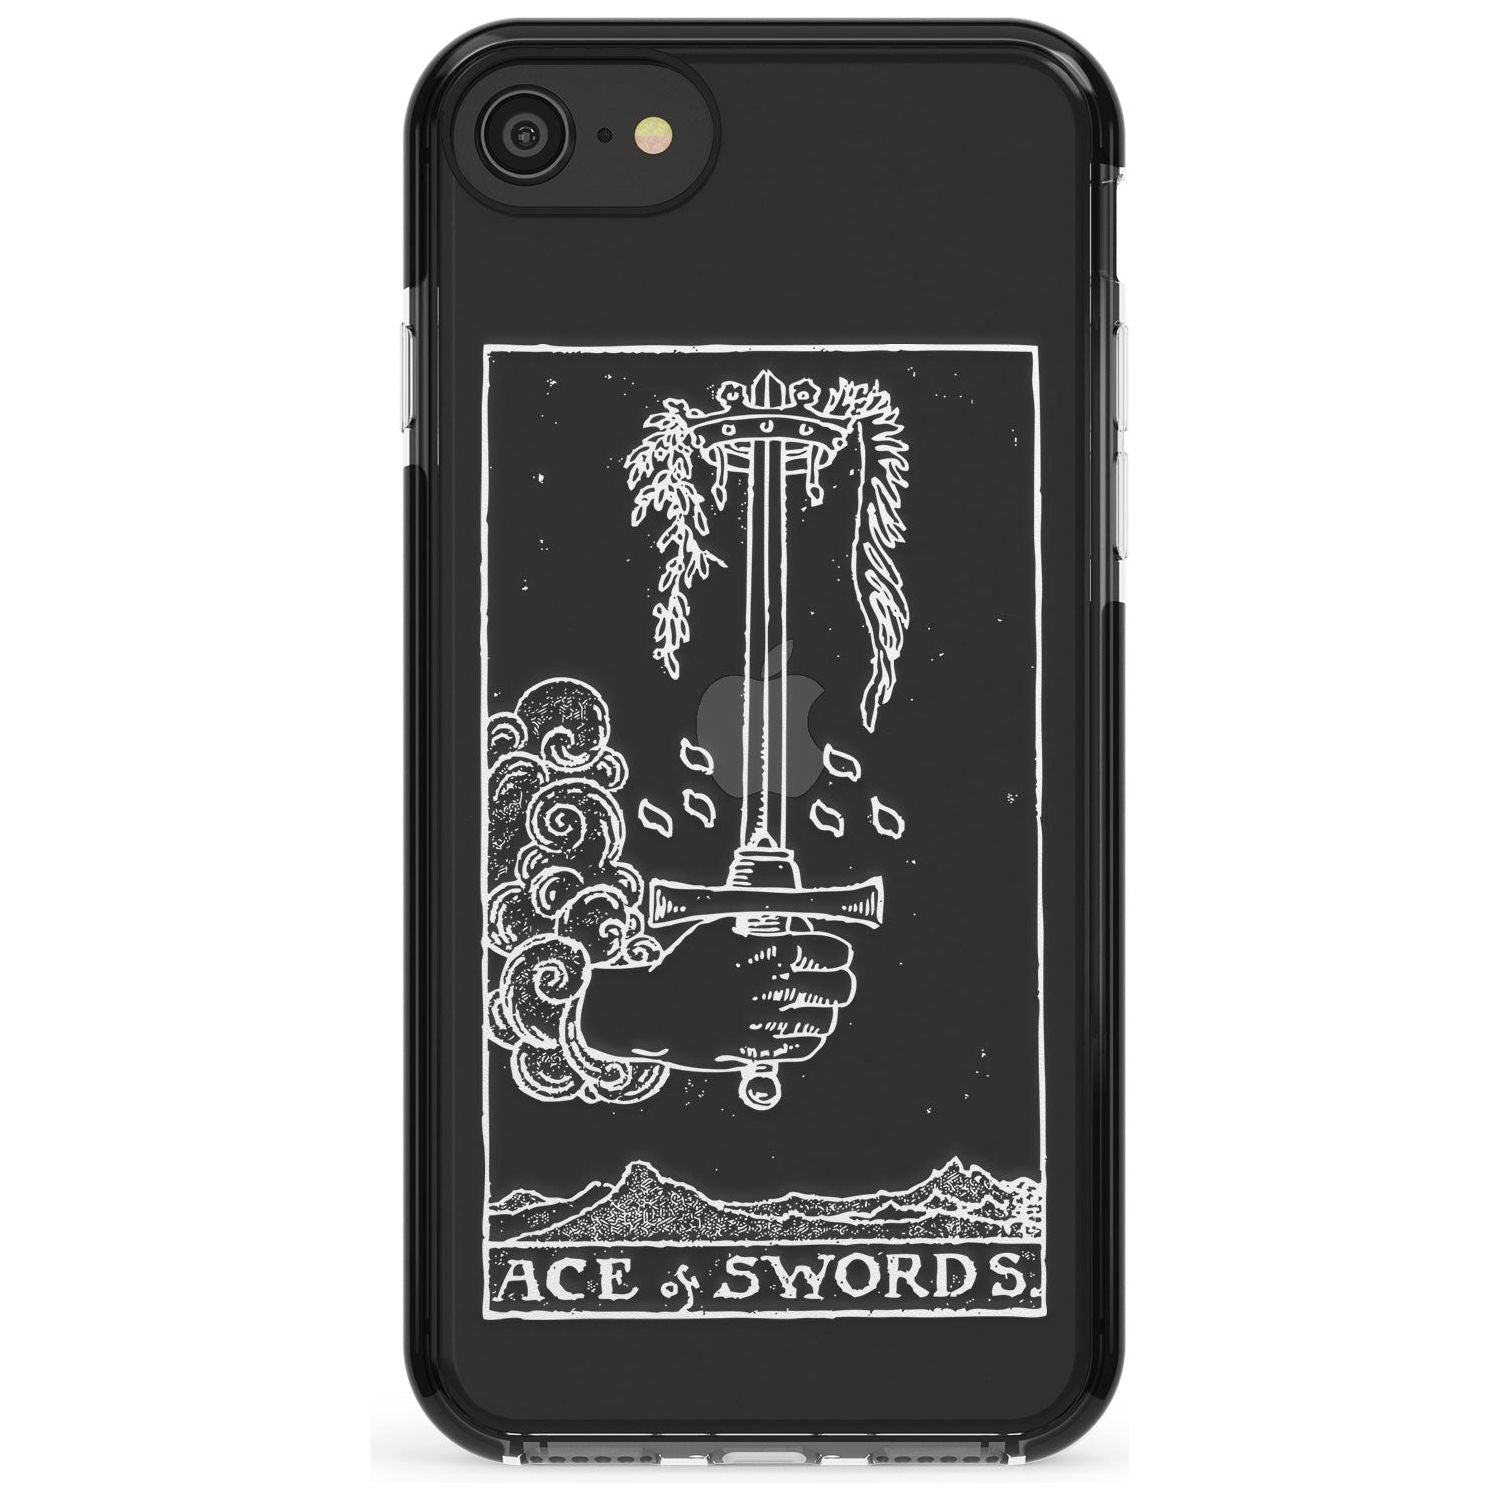 Ace of Swords Tarot Card - White Transparent Pink Fade Impact Phone Case for iPhone SE 8 7 Plus